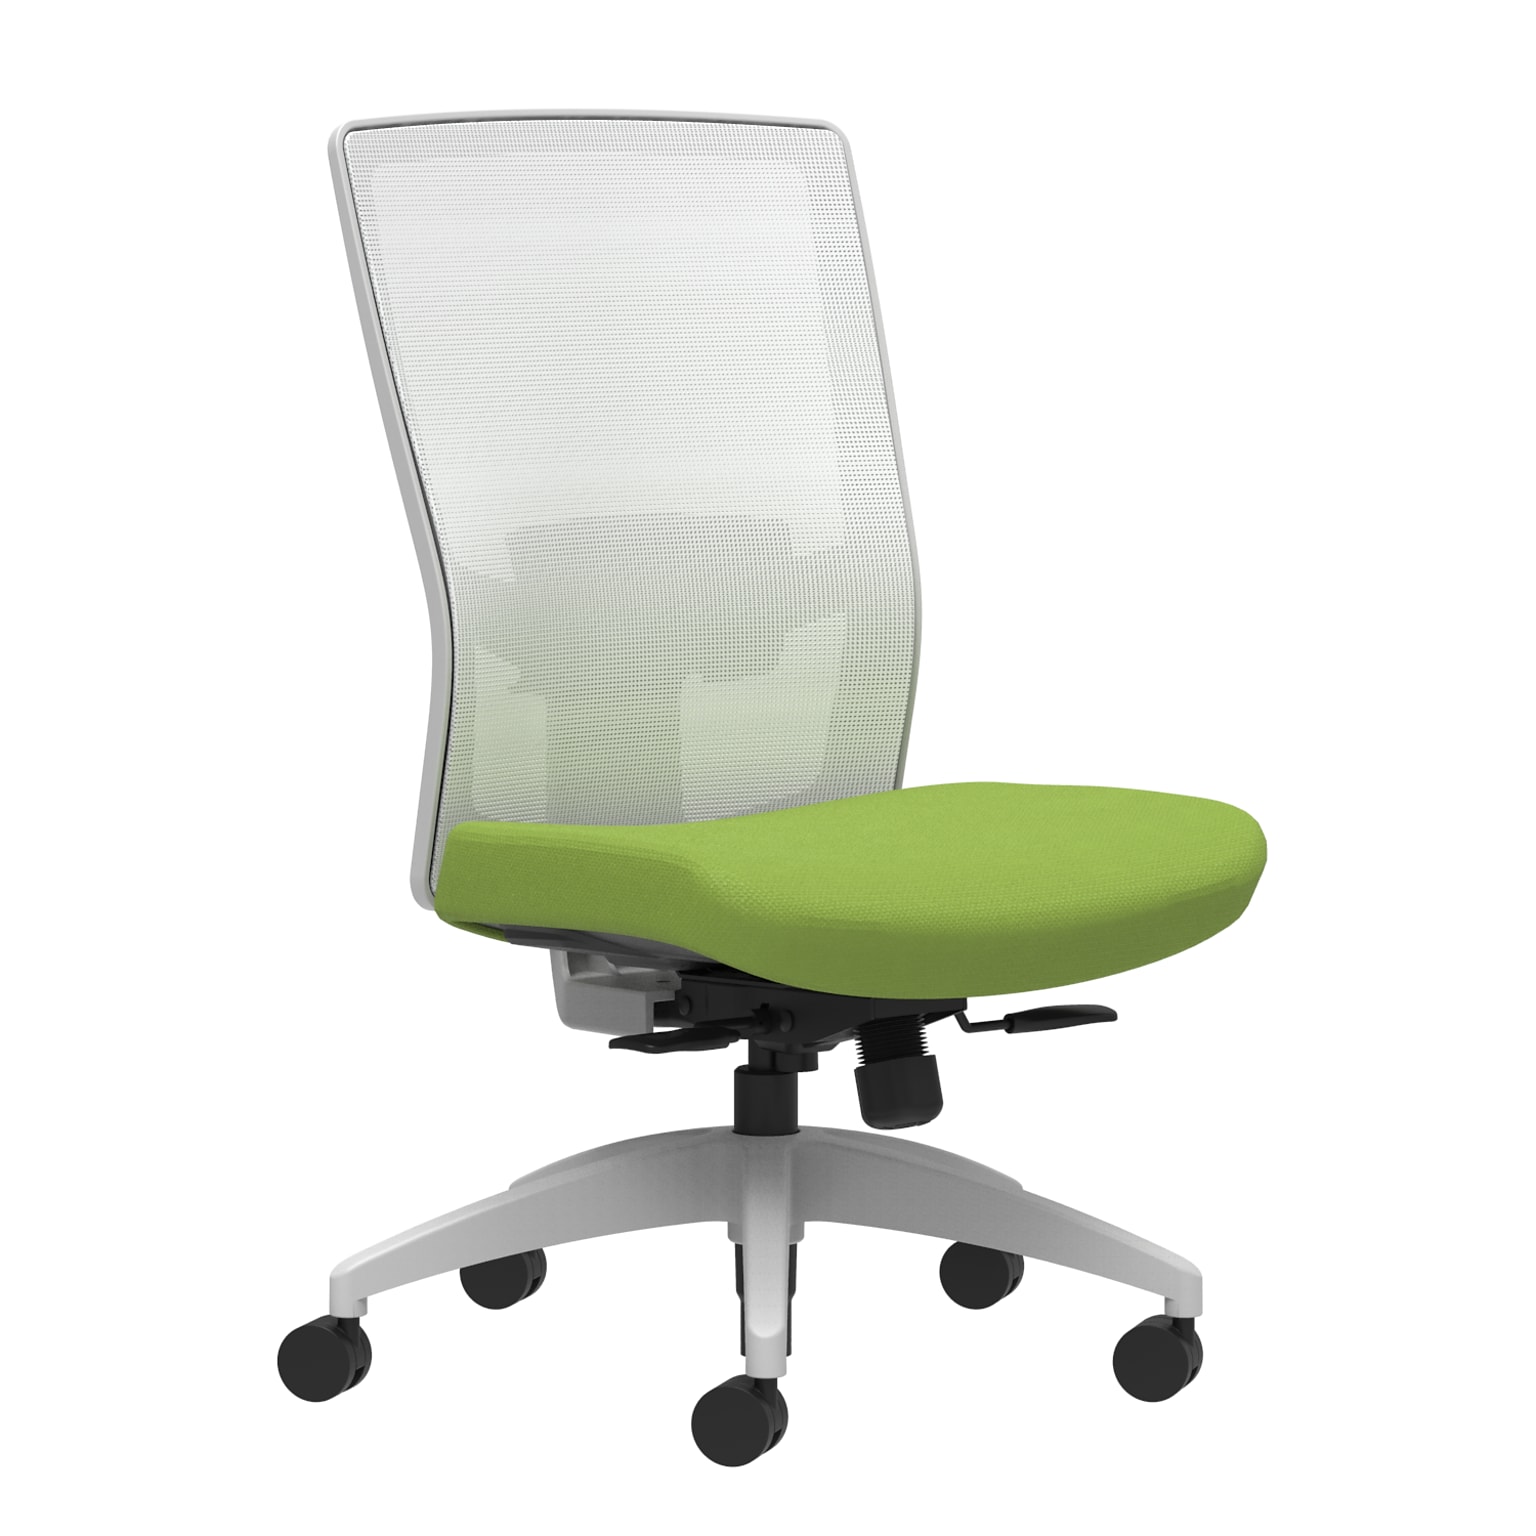 Union & Scale Workplace2.0™ Fabric Task Chair, Pear, Adjustable Lumbar, Armless, Synchro-Tilt w/Seat Slide Seat Control (53501)